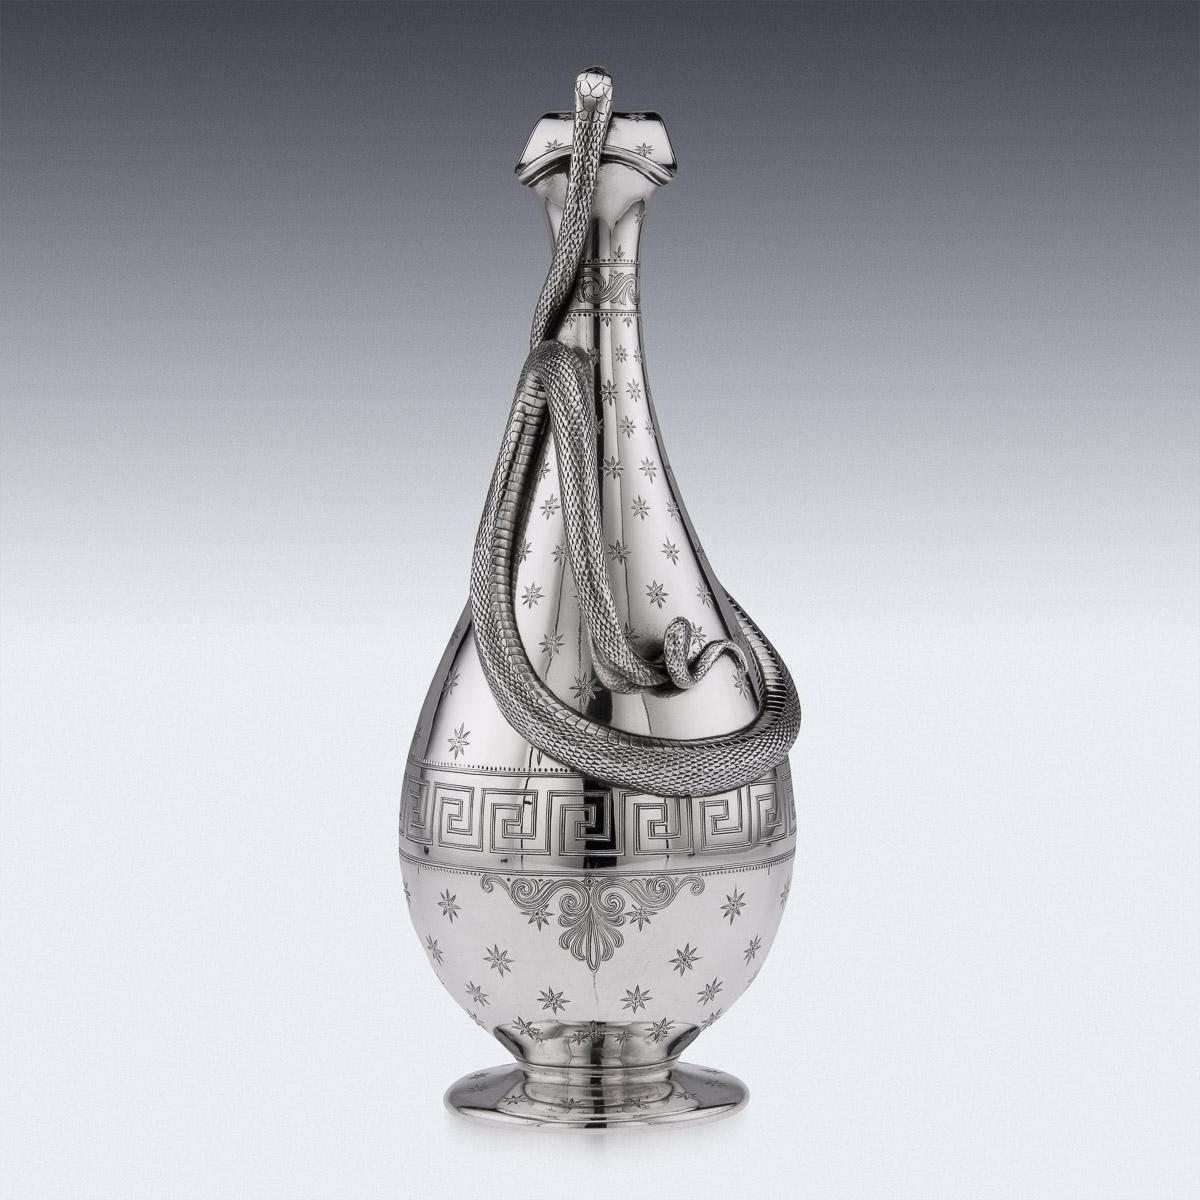 19th Century Victorian silver magnificent wine jug, of very large size, baluster form, the body engraved with Grecian turn key border, with a large oval vacant cartooche surrounded by star bursts and the body applied with a realistically modeled